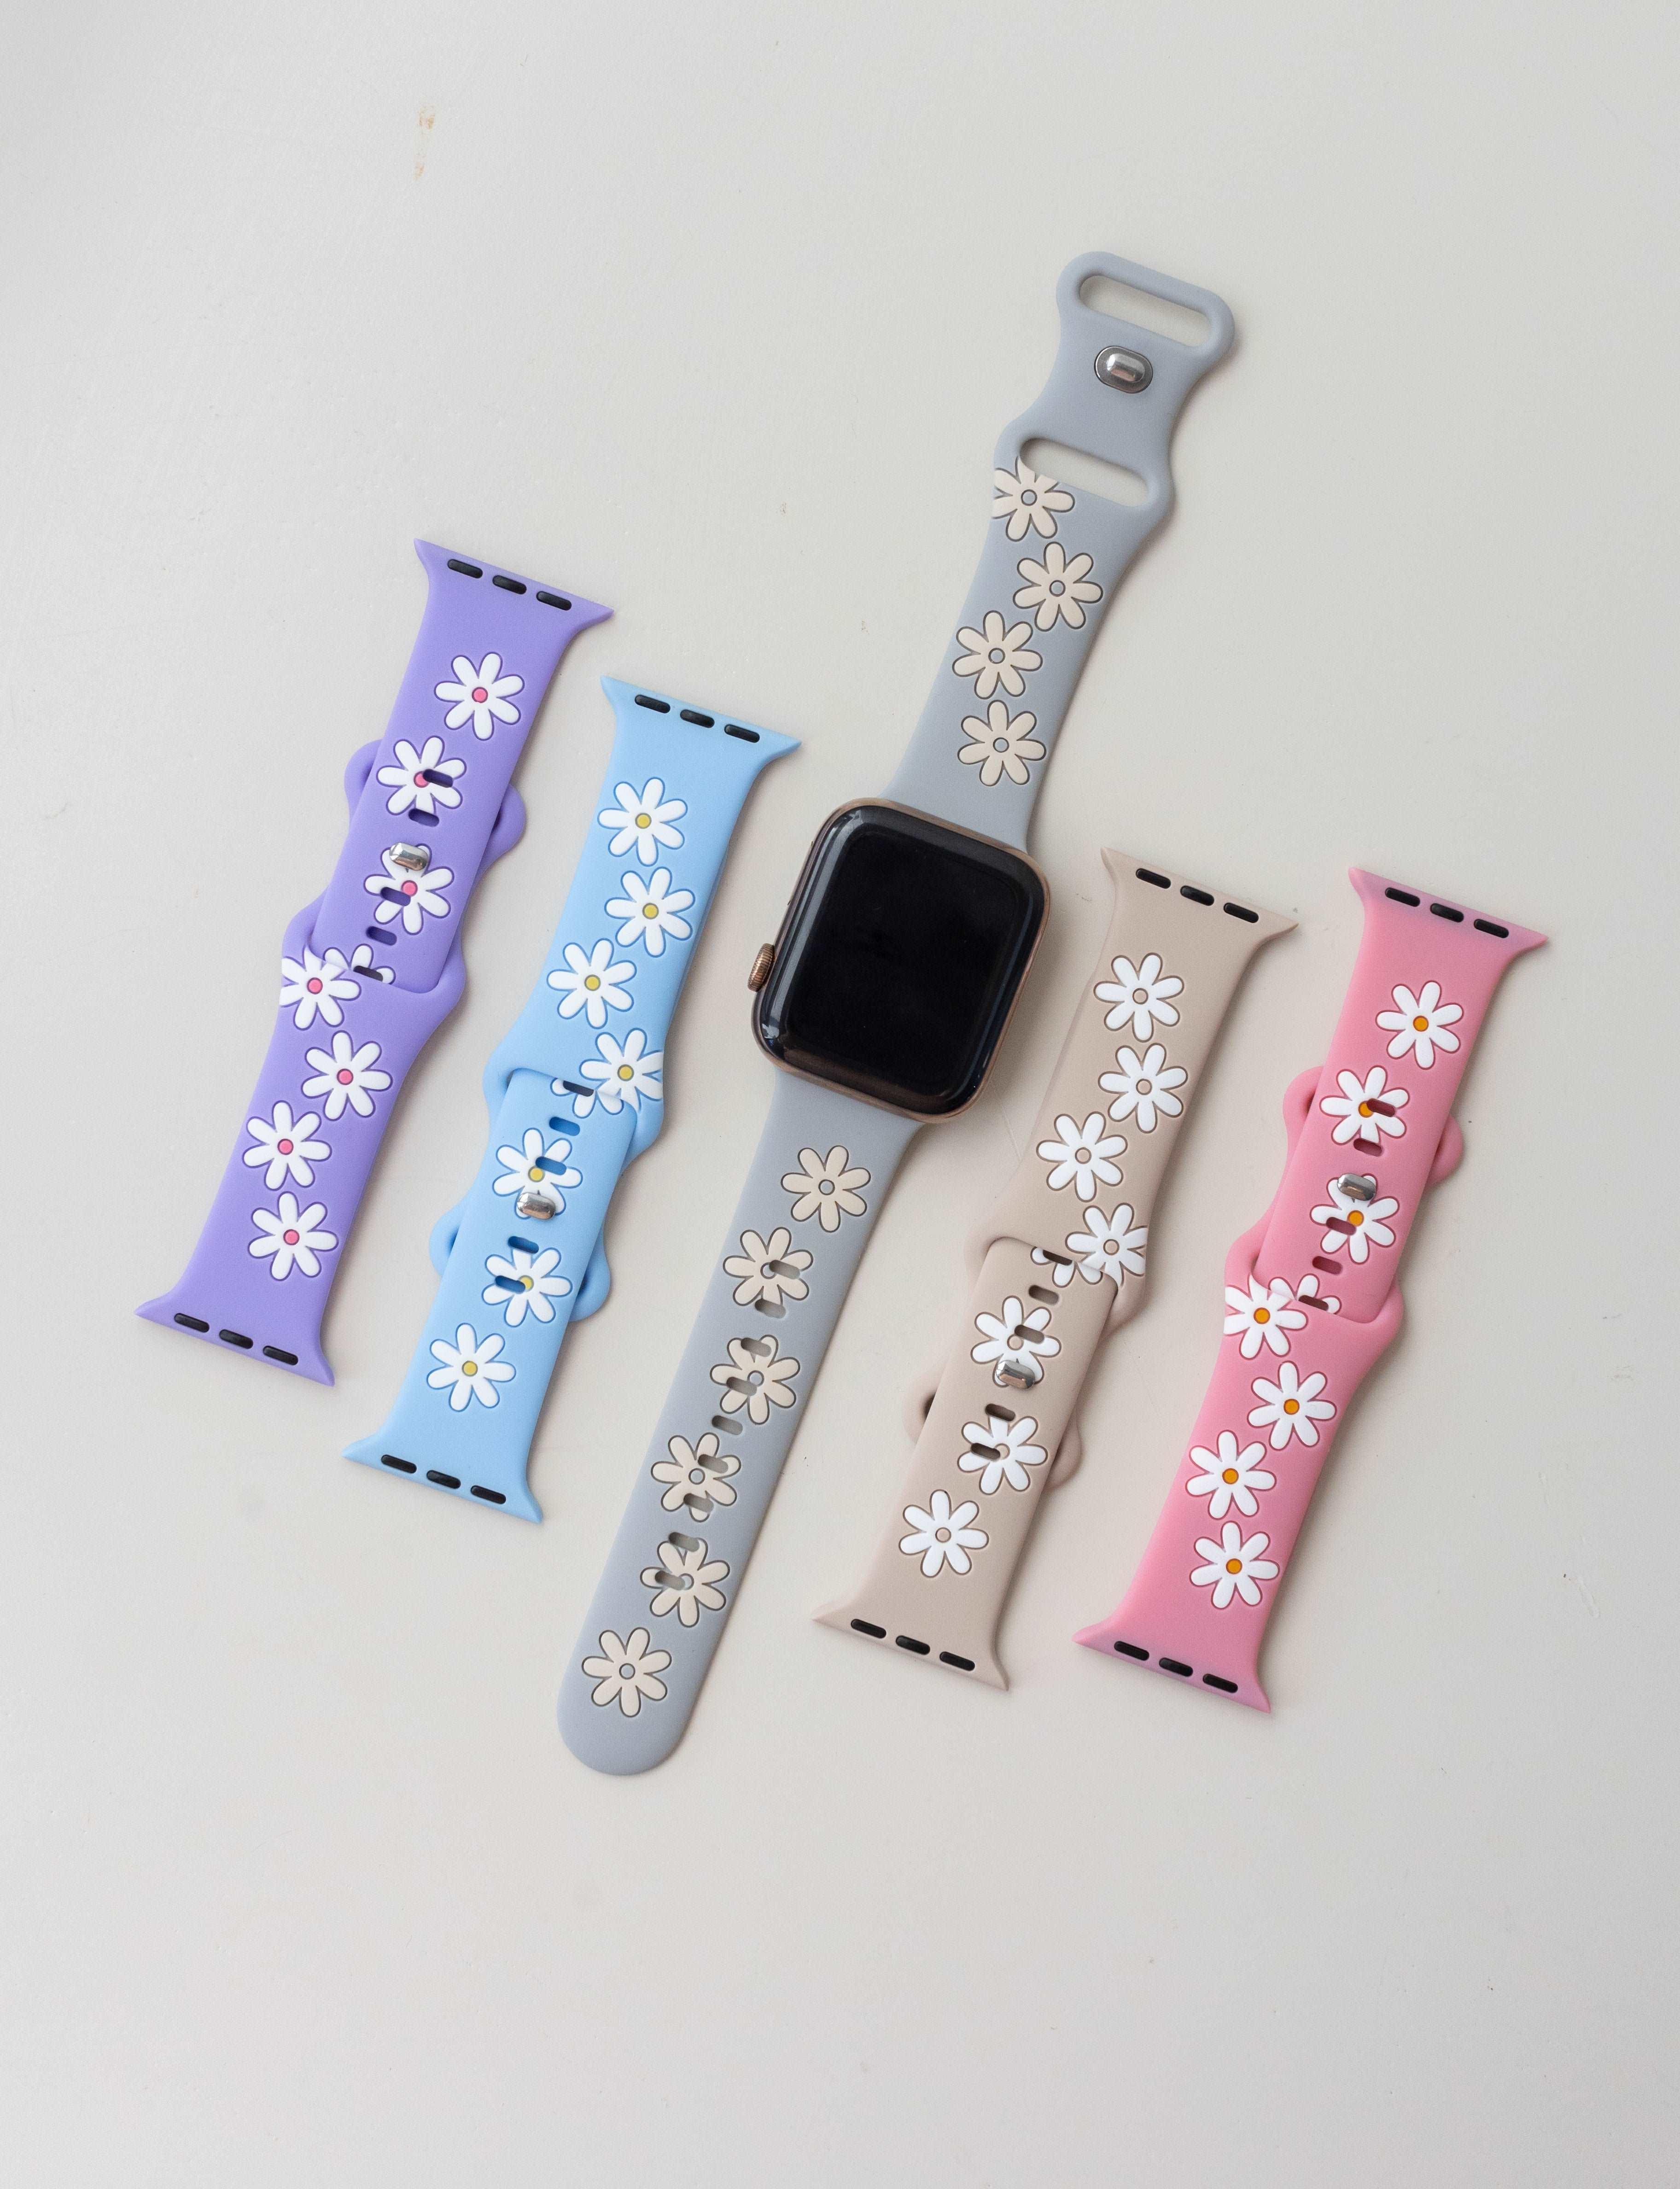 5 Daisy Apple Watch Faces, Smartwatch Wallpaper, Beige Brown, Blue White,  Floral Face, Apple Watch Background, Flower Watch Face, Boho Tones - Etsy